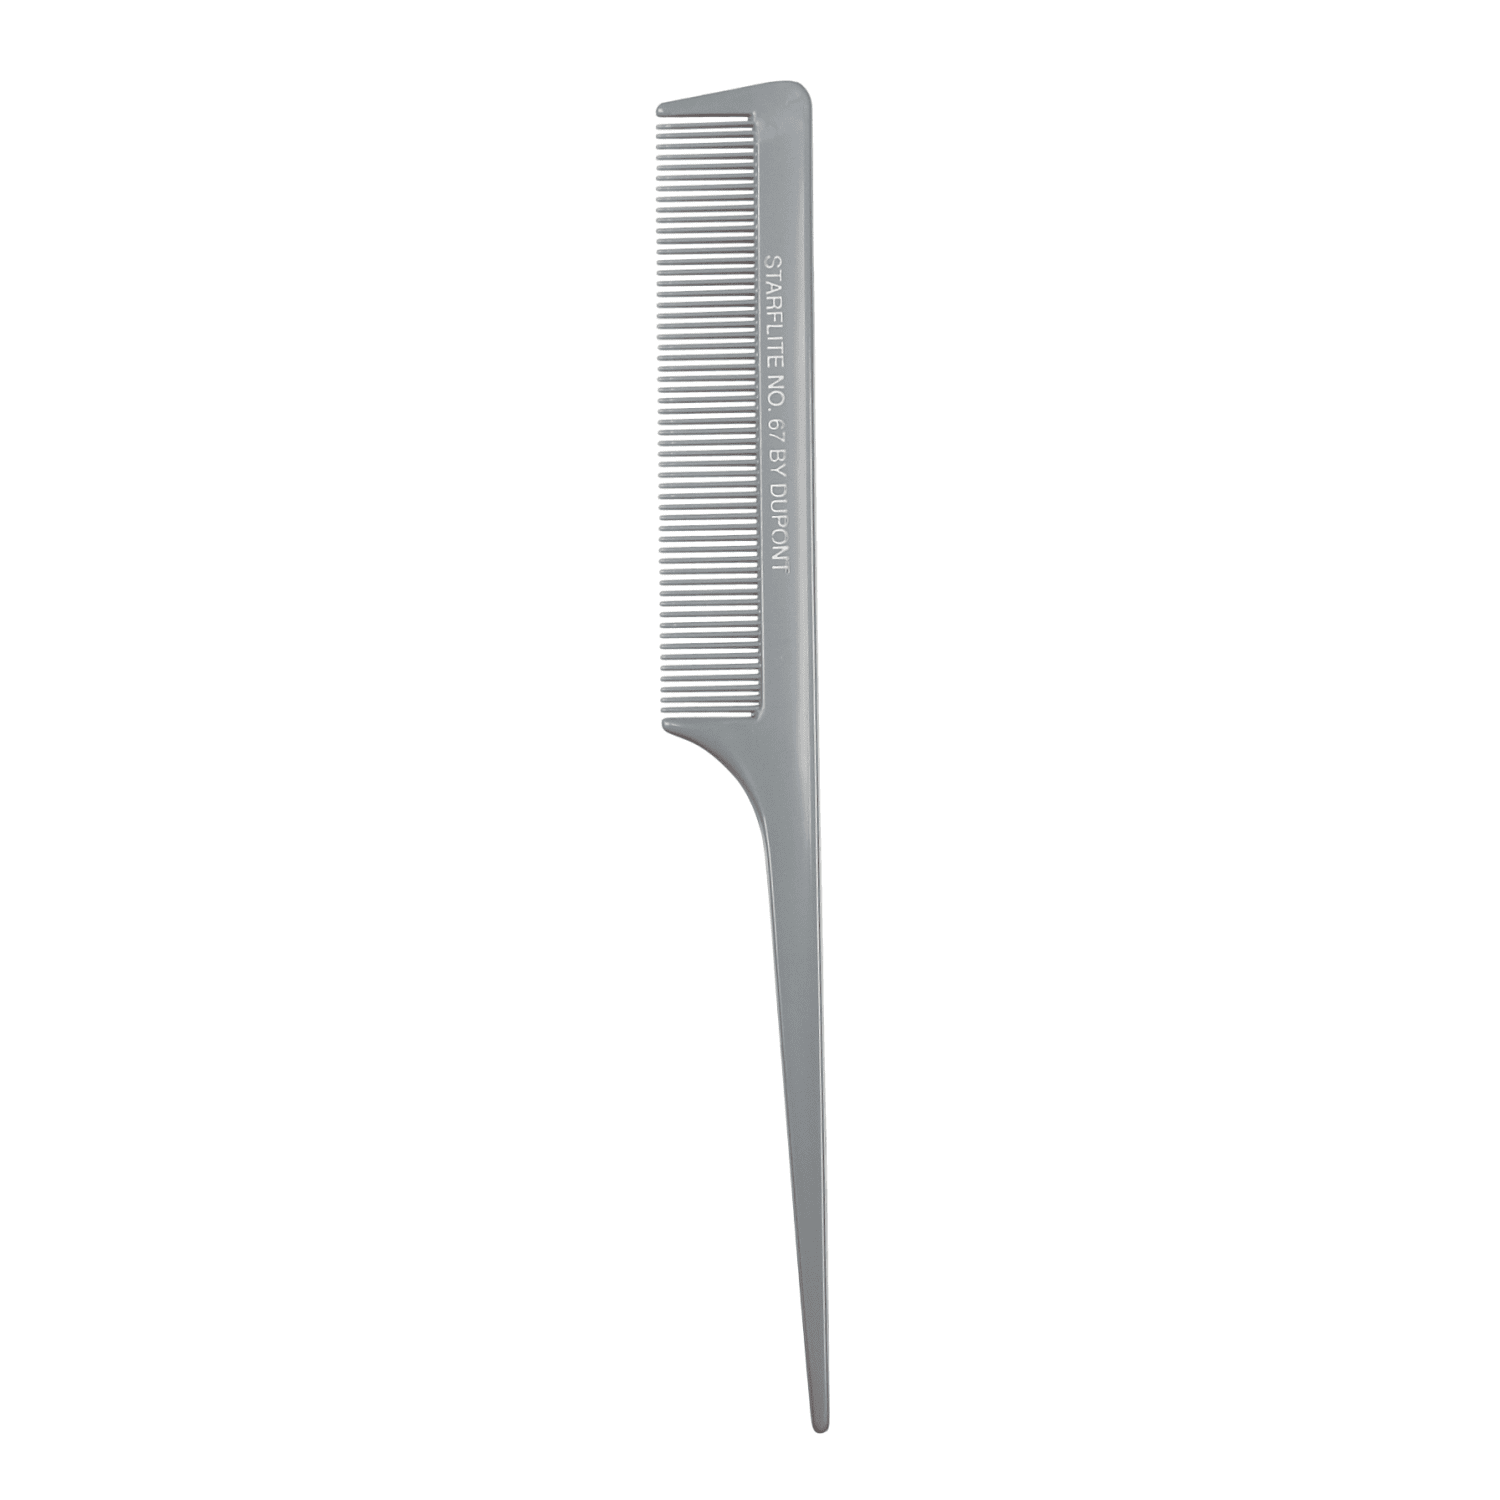 Starflite Comb No. 67 Tail Anti Static Hair Comb by Dupont